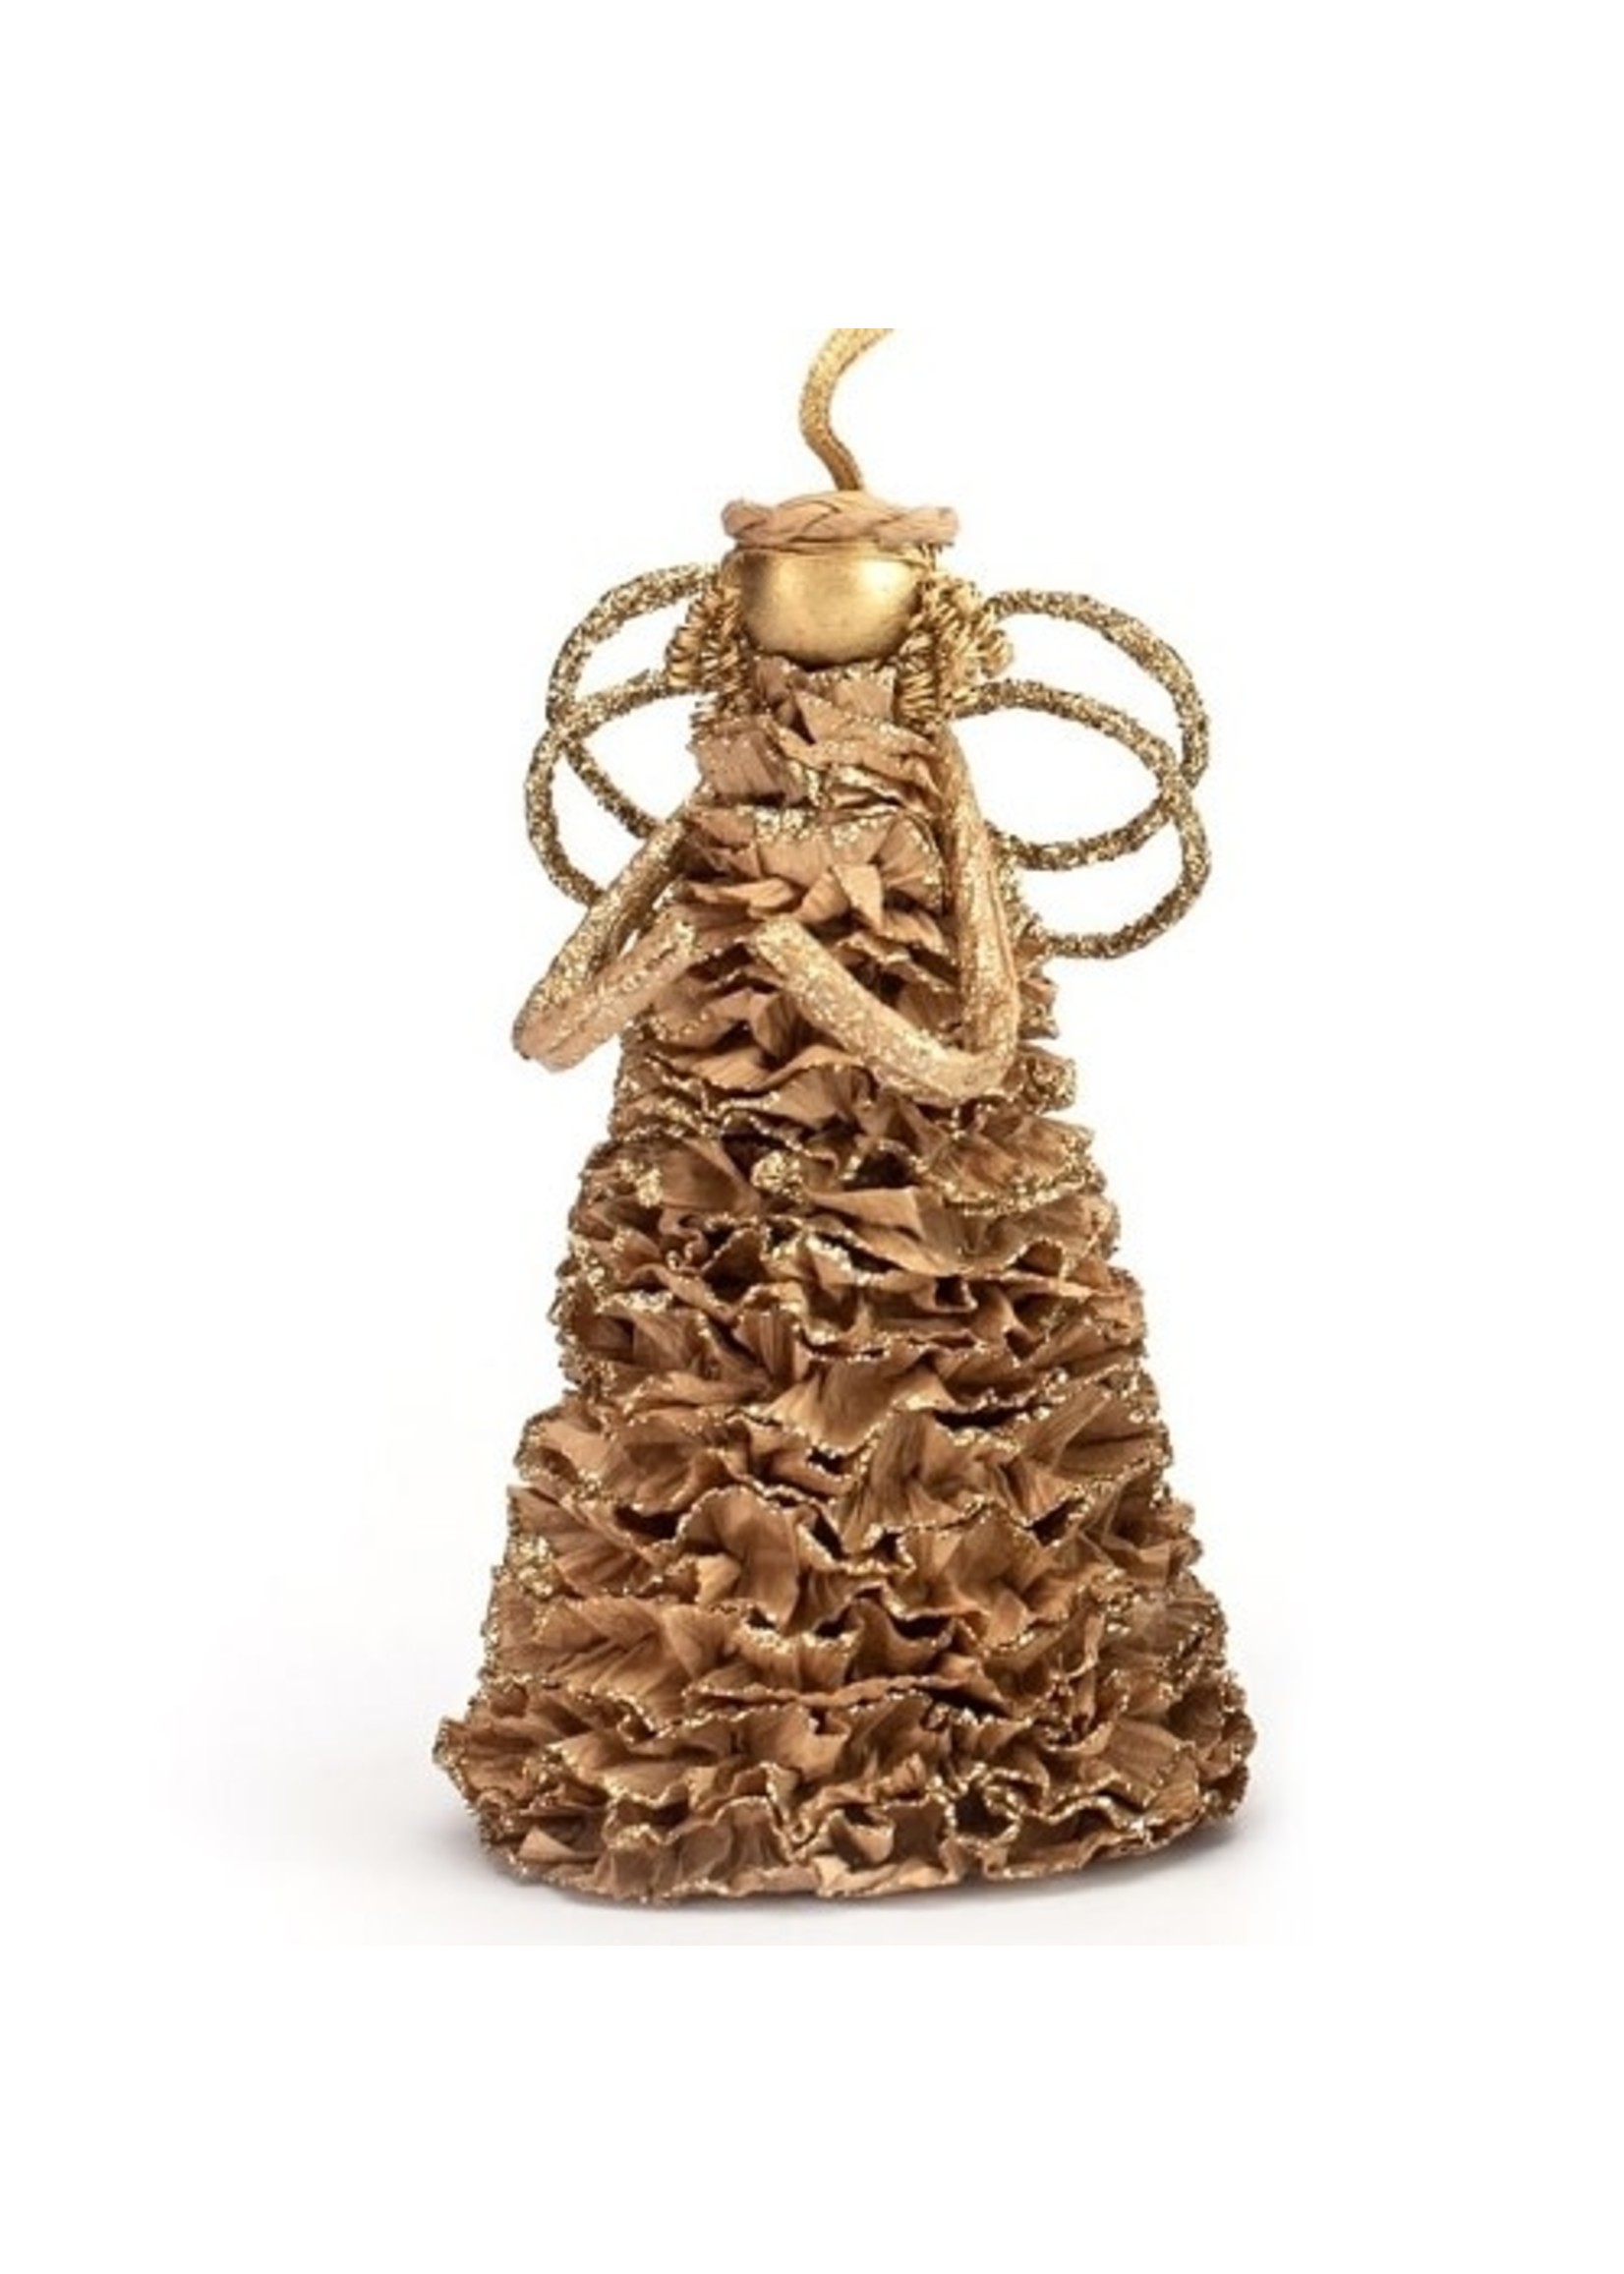 Ornament - Angel - Ruffled Paper with Layered Dress 6"